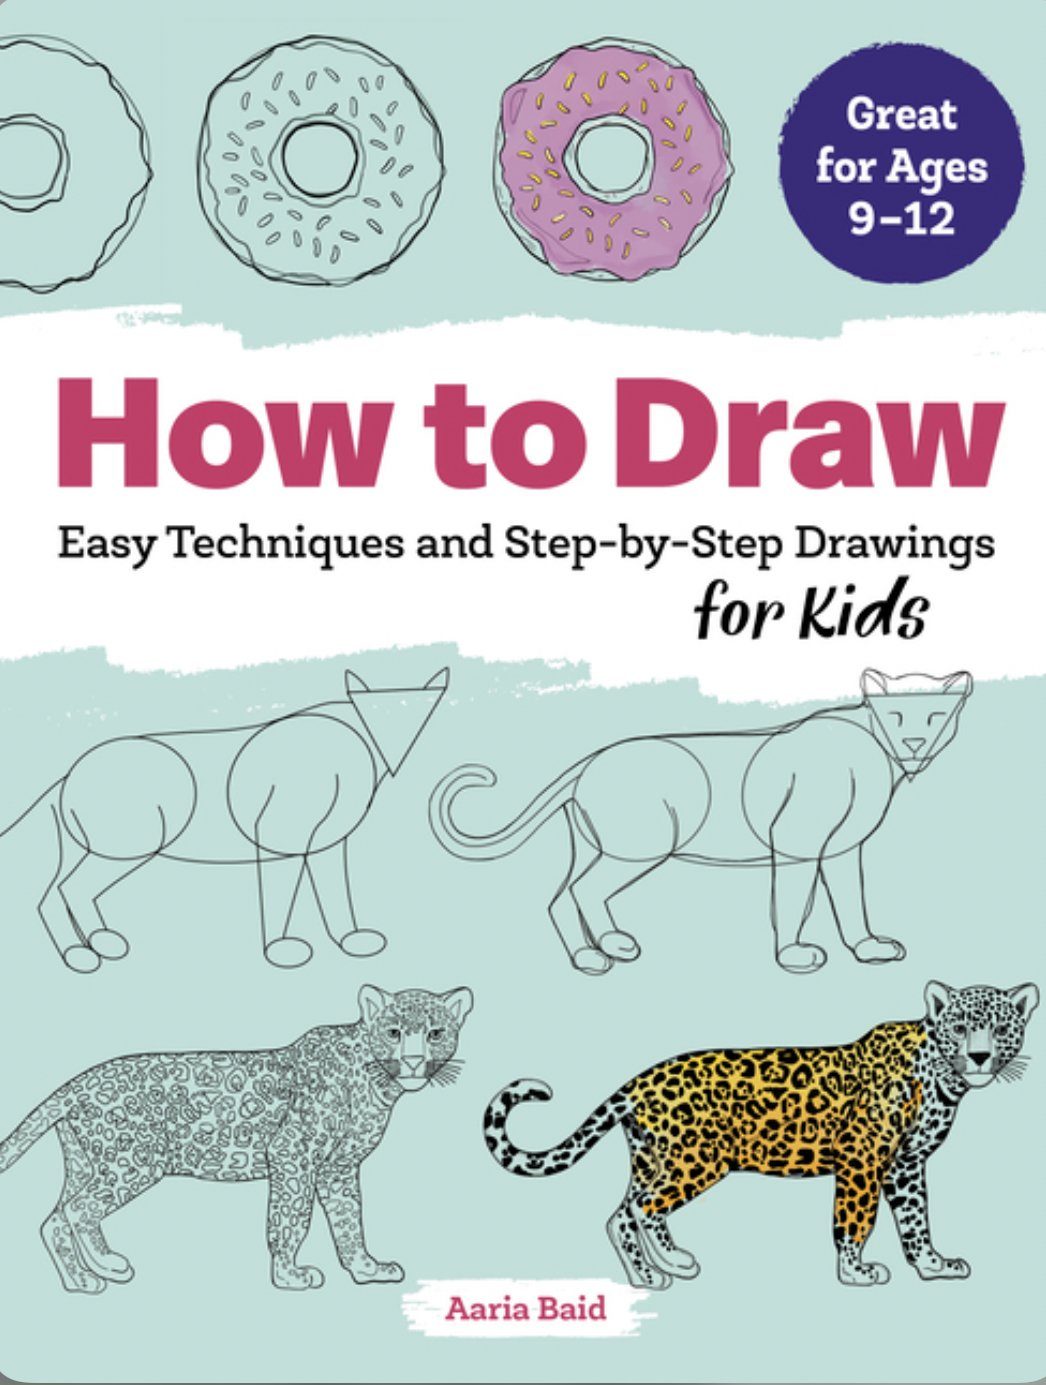 How to Draw | Easy Techniques and Step-by-Step Drawings for Kids